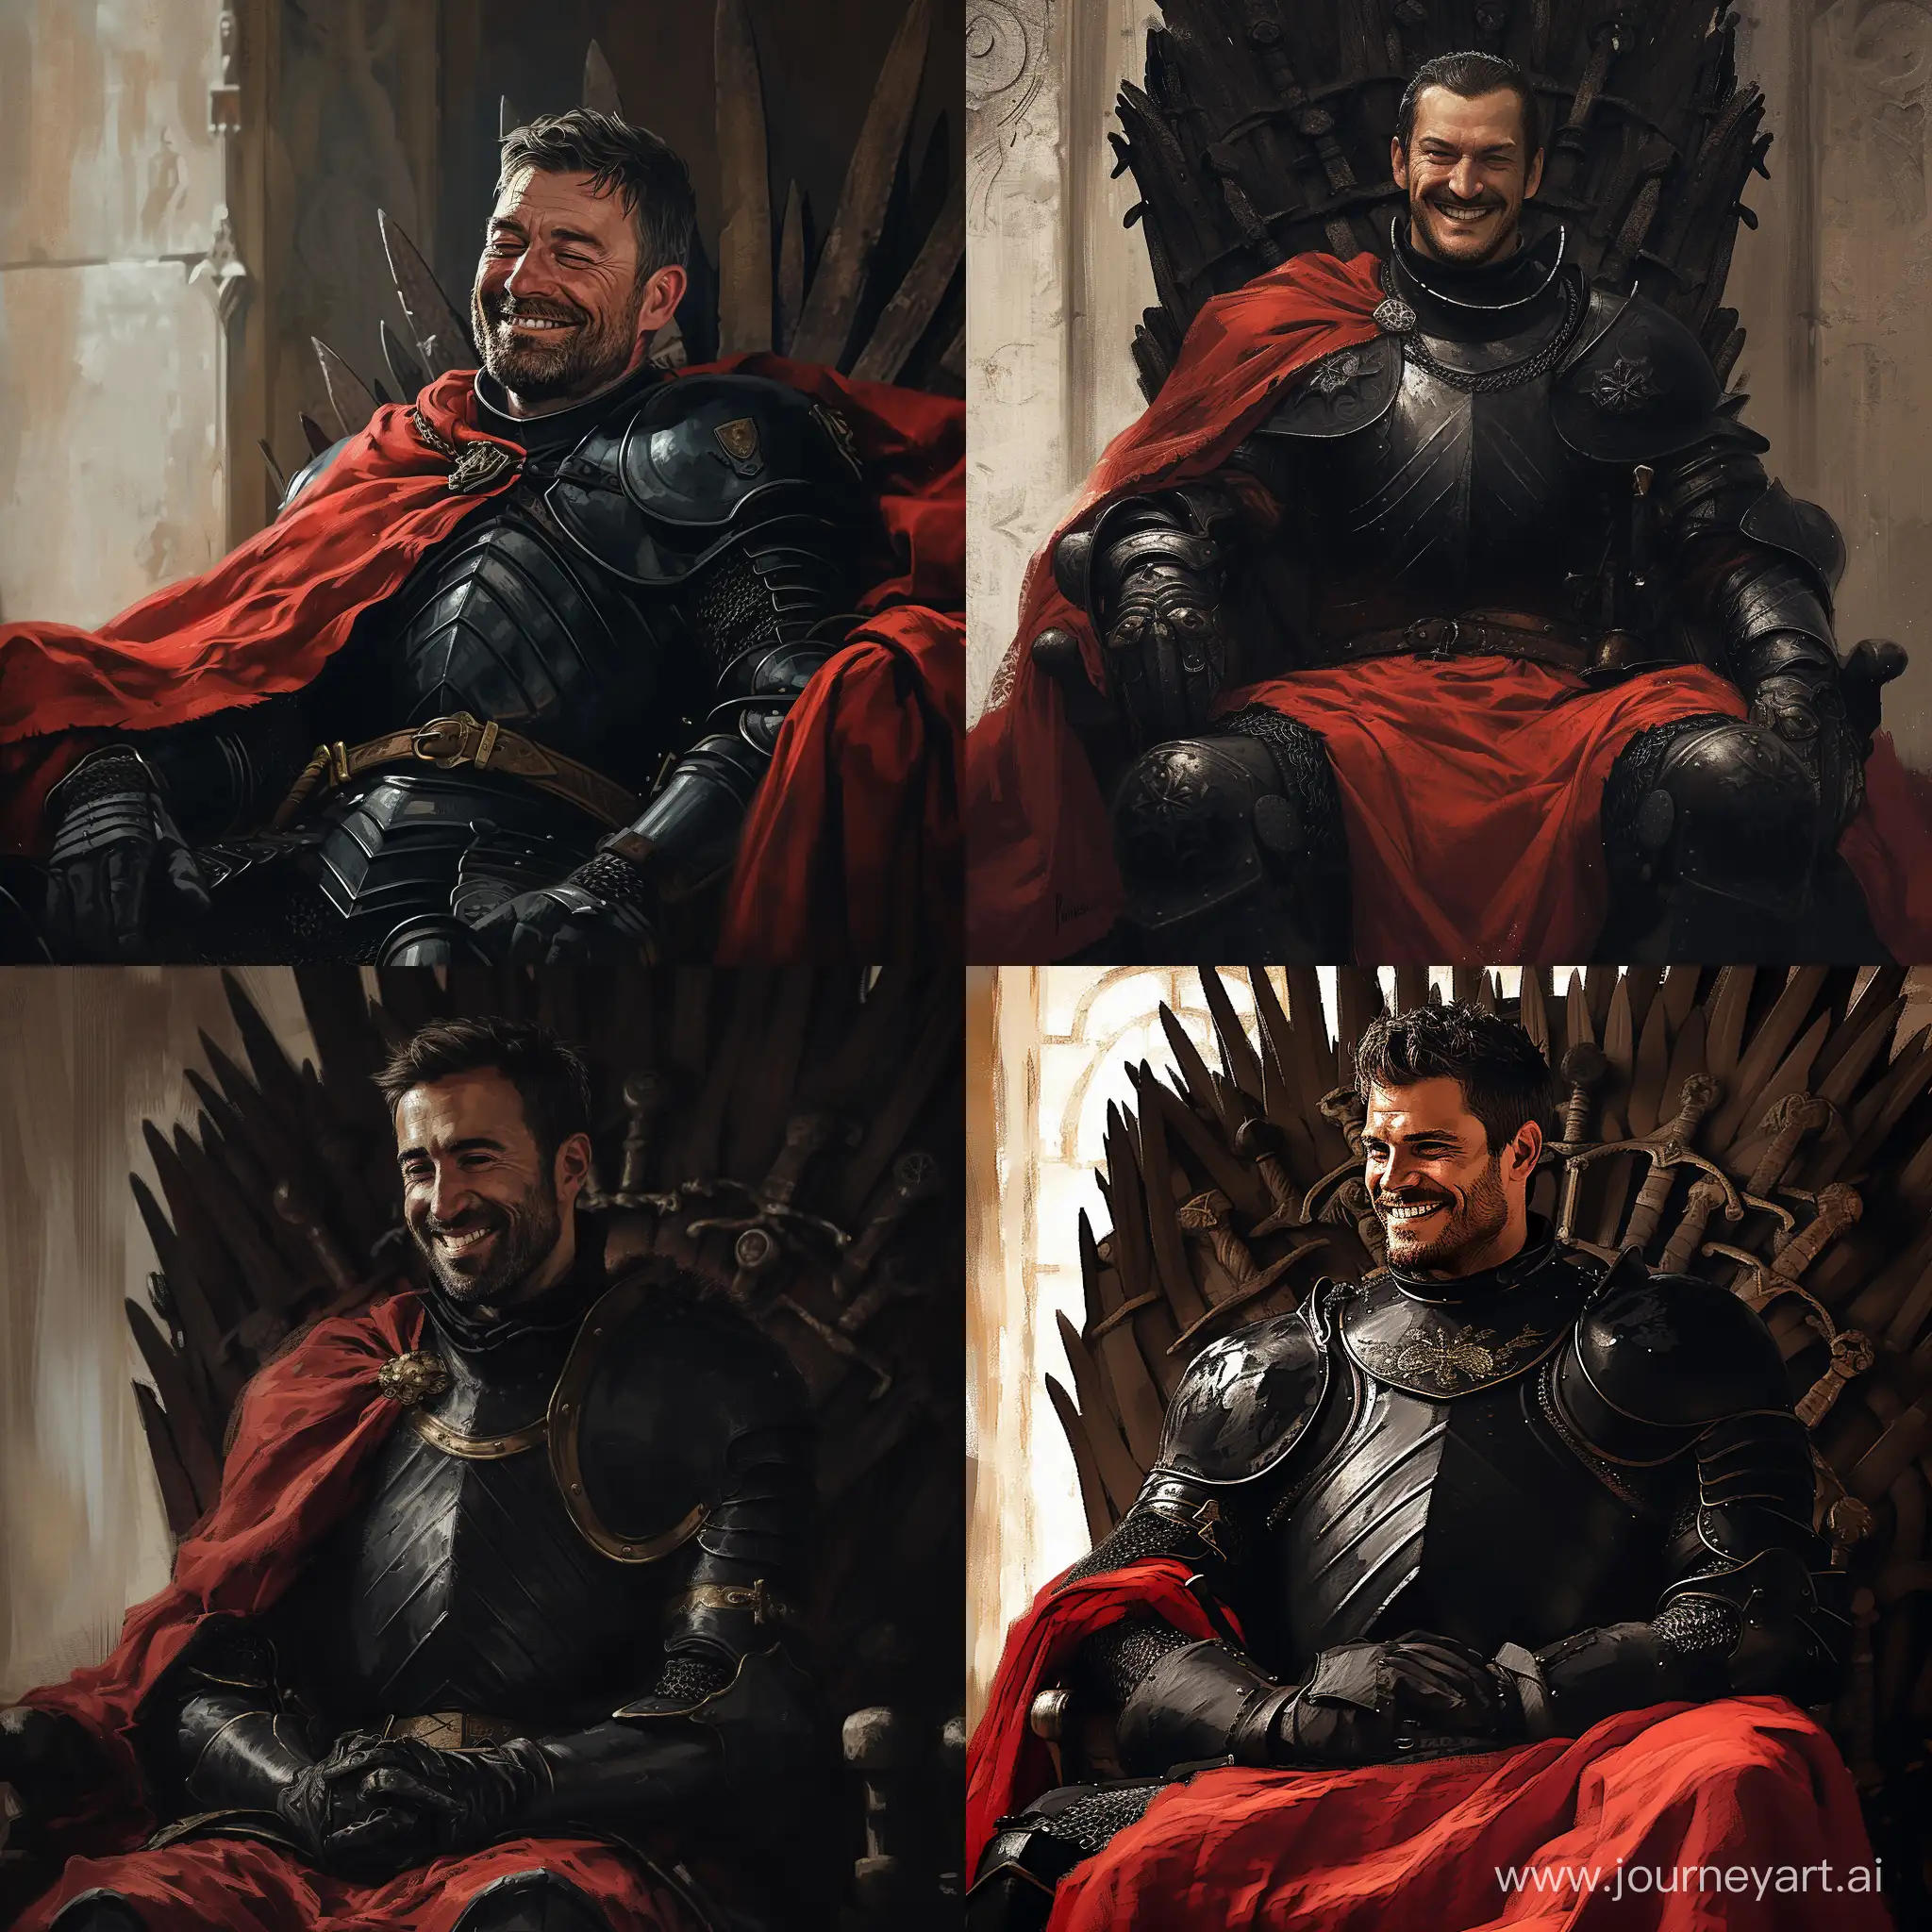 Smiling-Lord-in-Black-Armor-on-Throne-with-Red-Cloak